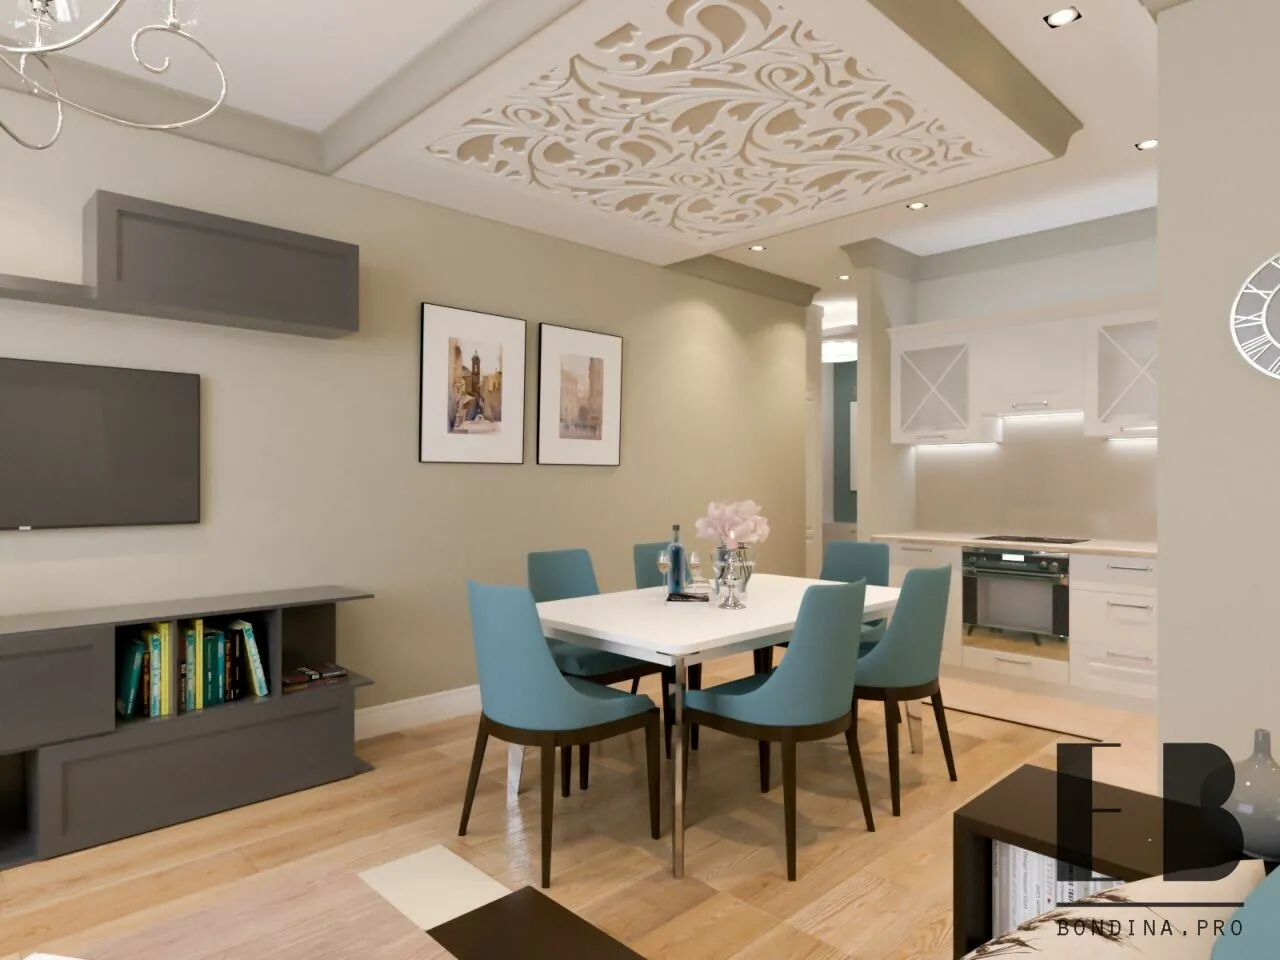 Beige dining room with beautiful ceiling design, blue chairs and grey shelves